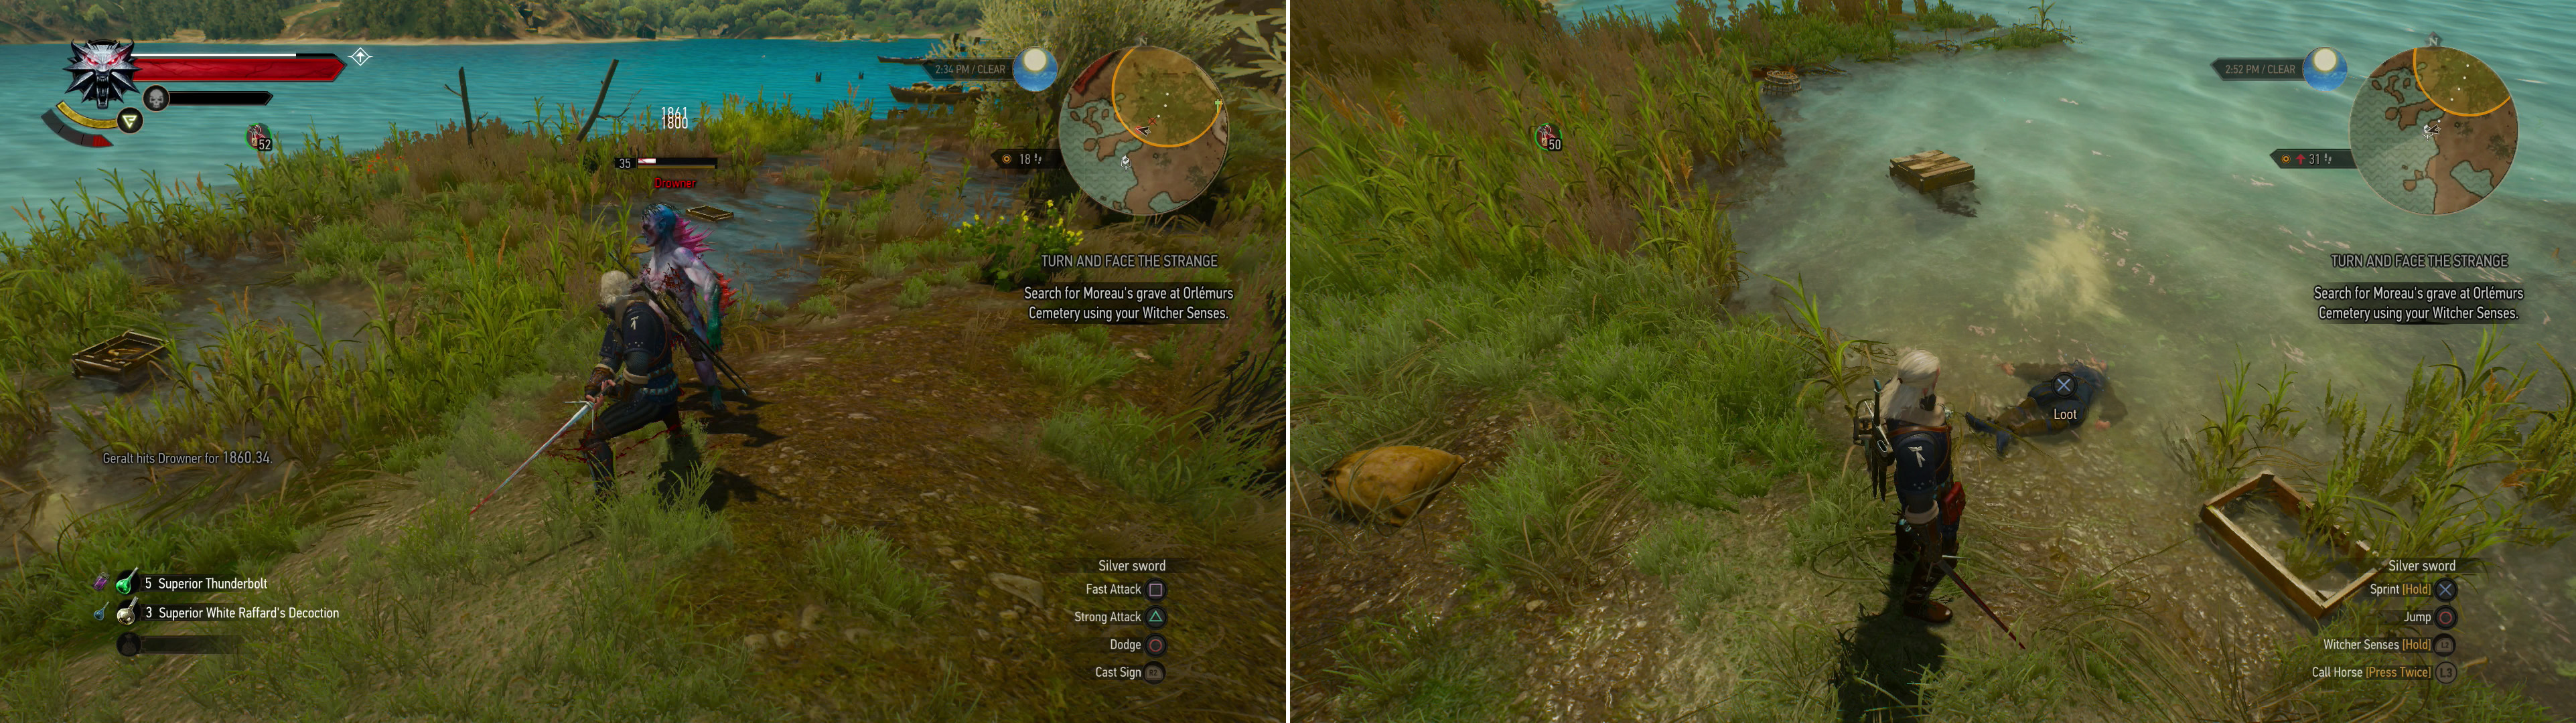 Kill the Drowners by the shore (left) then search a body in the water to start the quest "Treasure Hunt: The Last Exploits of Selina's Gang" (right).